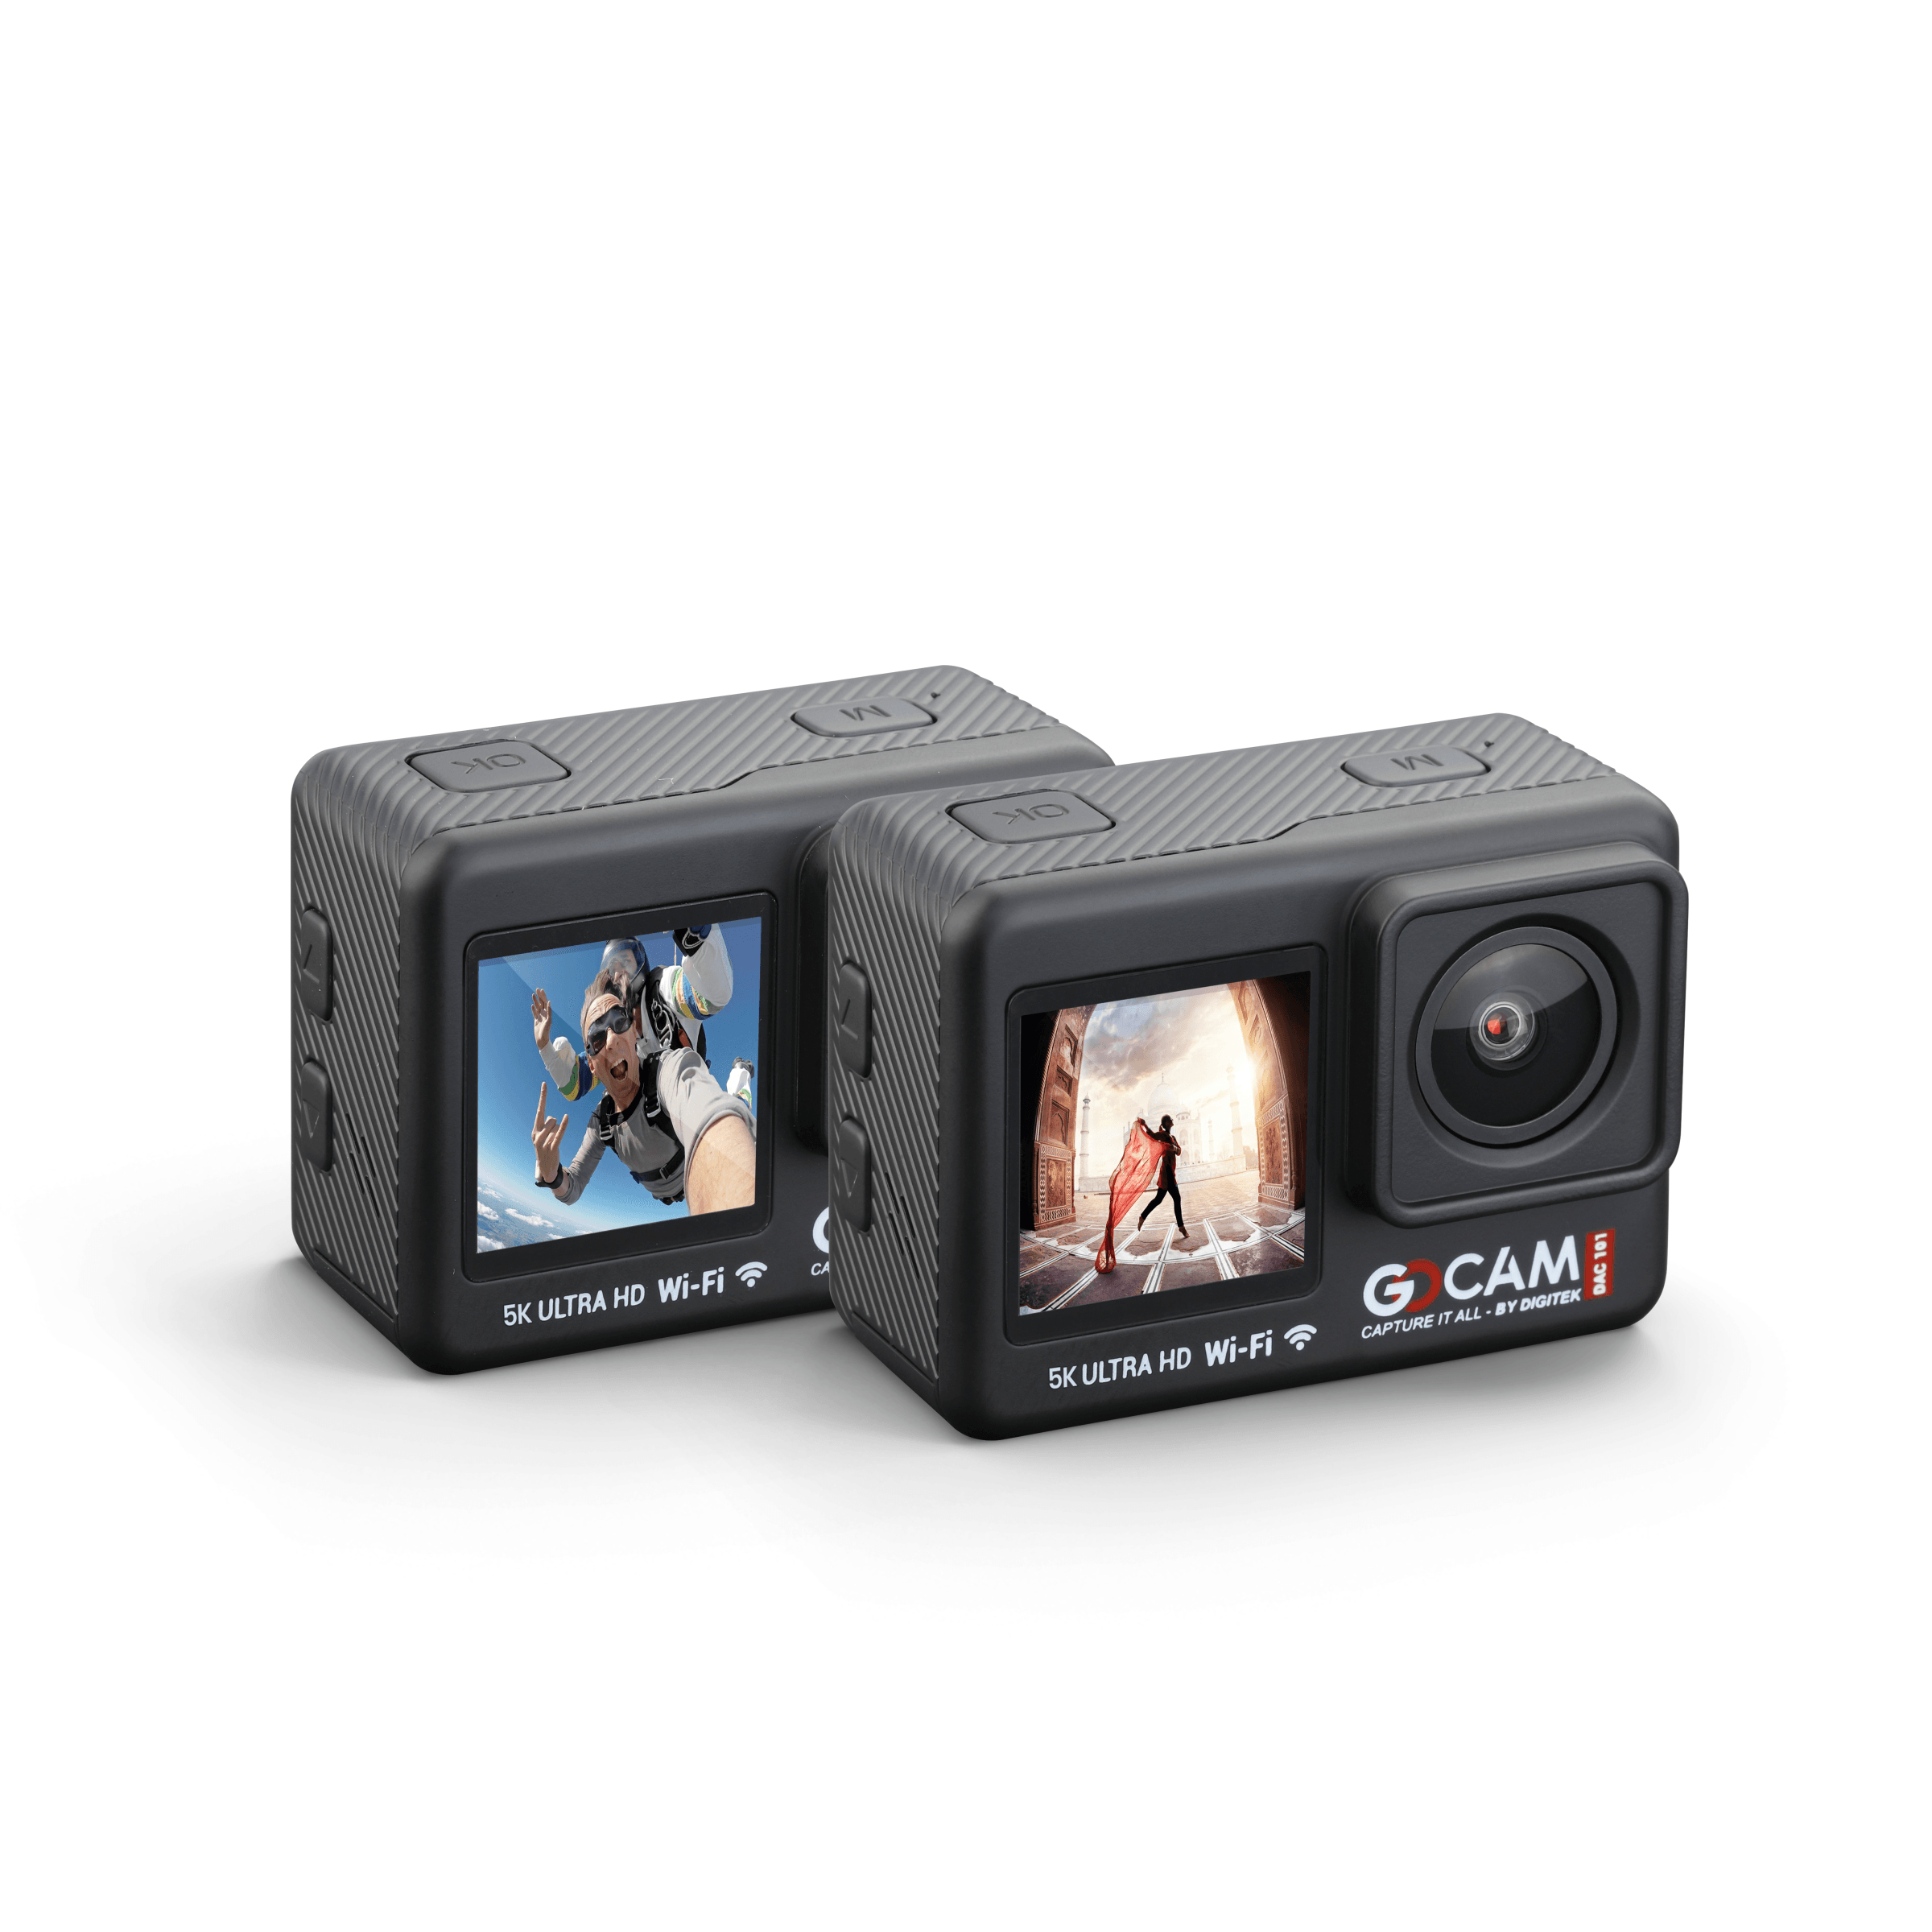 Buy NG Sports Action Camera 4K Touch Black Online in India